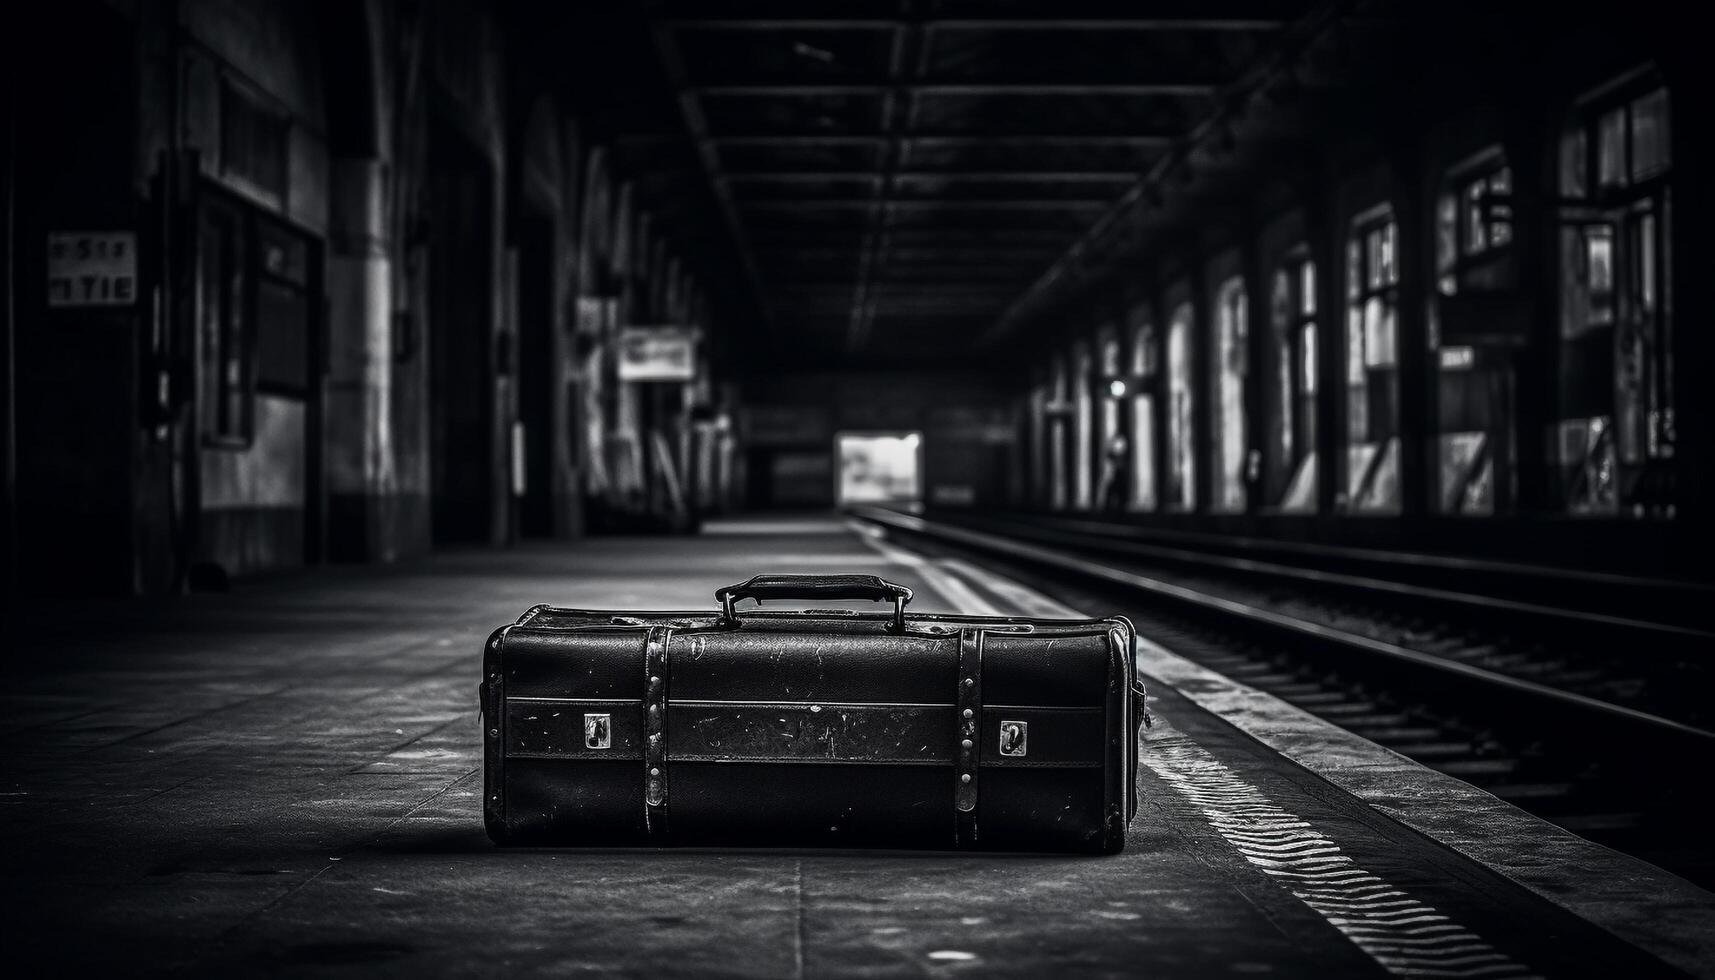 Abandoned luggage on old fashioned railroad station platform, leaving for journey generated by AI photo